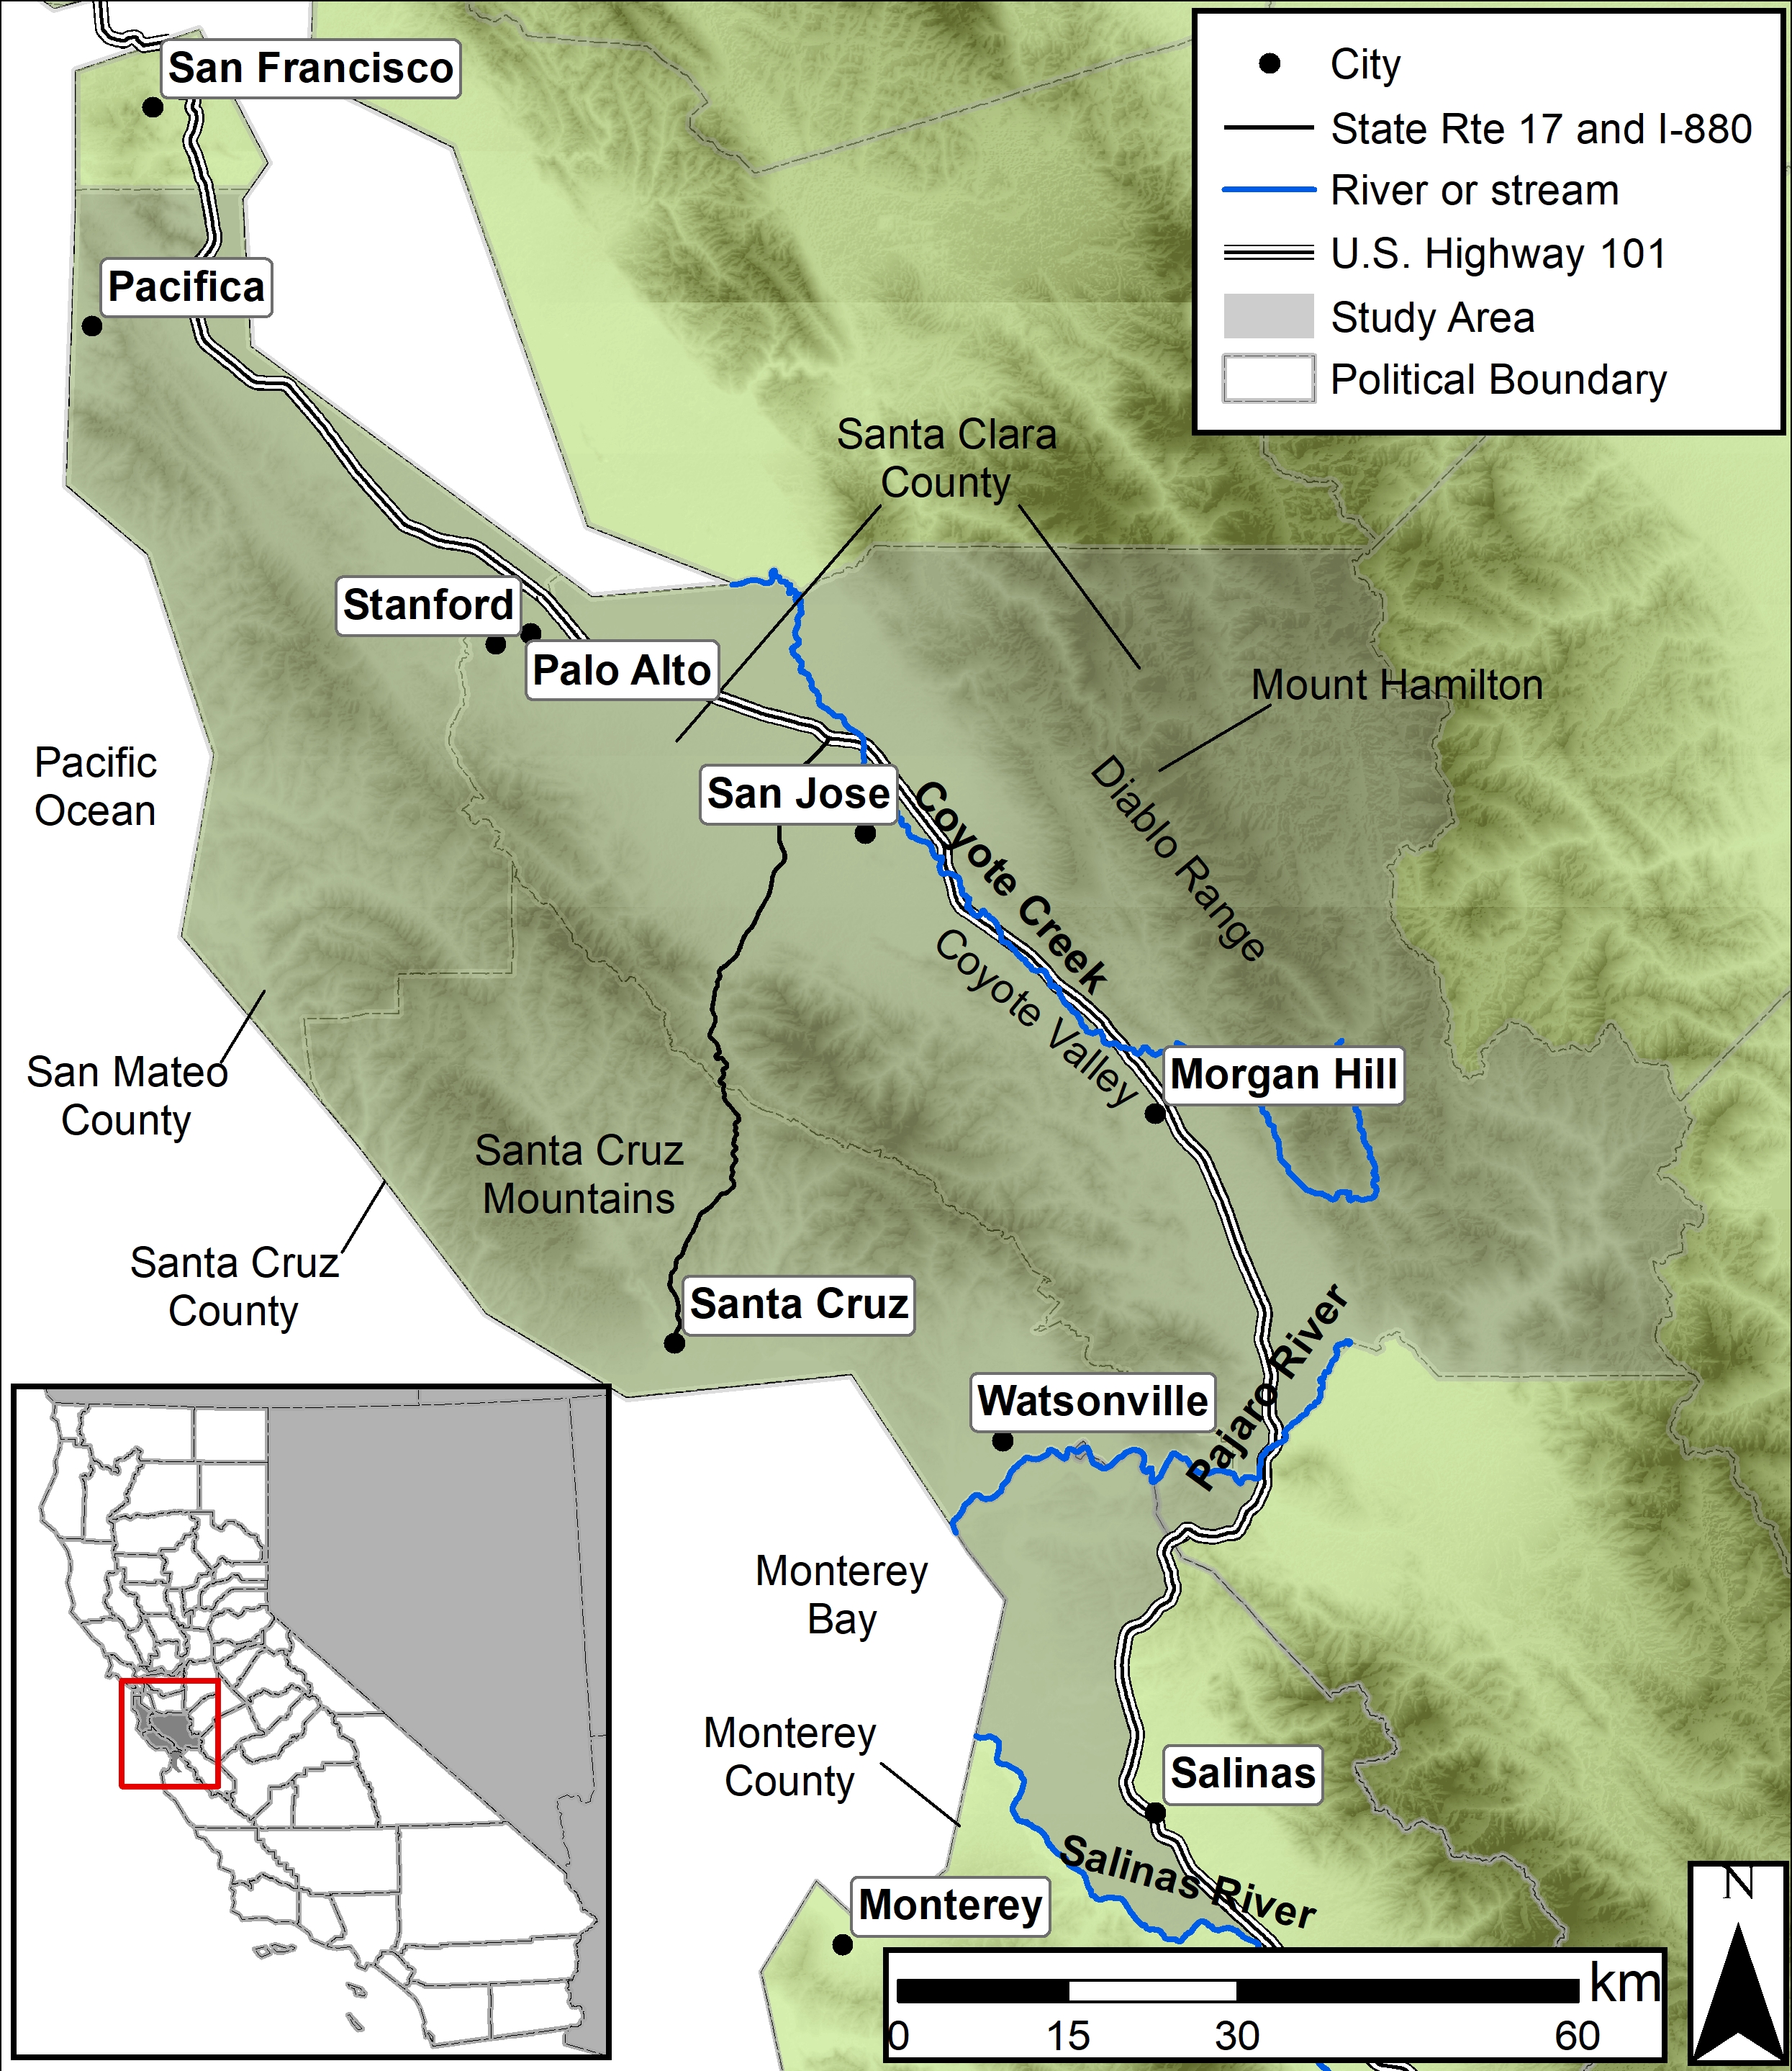 Figure 1. The study area (gray shading) illustrates the counties with protected open space lands available to westward expansion of elk, if enabled by crossings over and under of U.S. Highway 101. It is bordered by San Francisco County to the north, and the Salinas River in Monterey County to the south. It also includes the area of aerial survey of the existing elk herds in Santa Clara County east of the freeway in the Diablo Range. Green shading displays topographic relief, with lighter shading indicating lower elevations and darker shading indicating higher elevations.